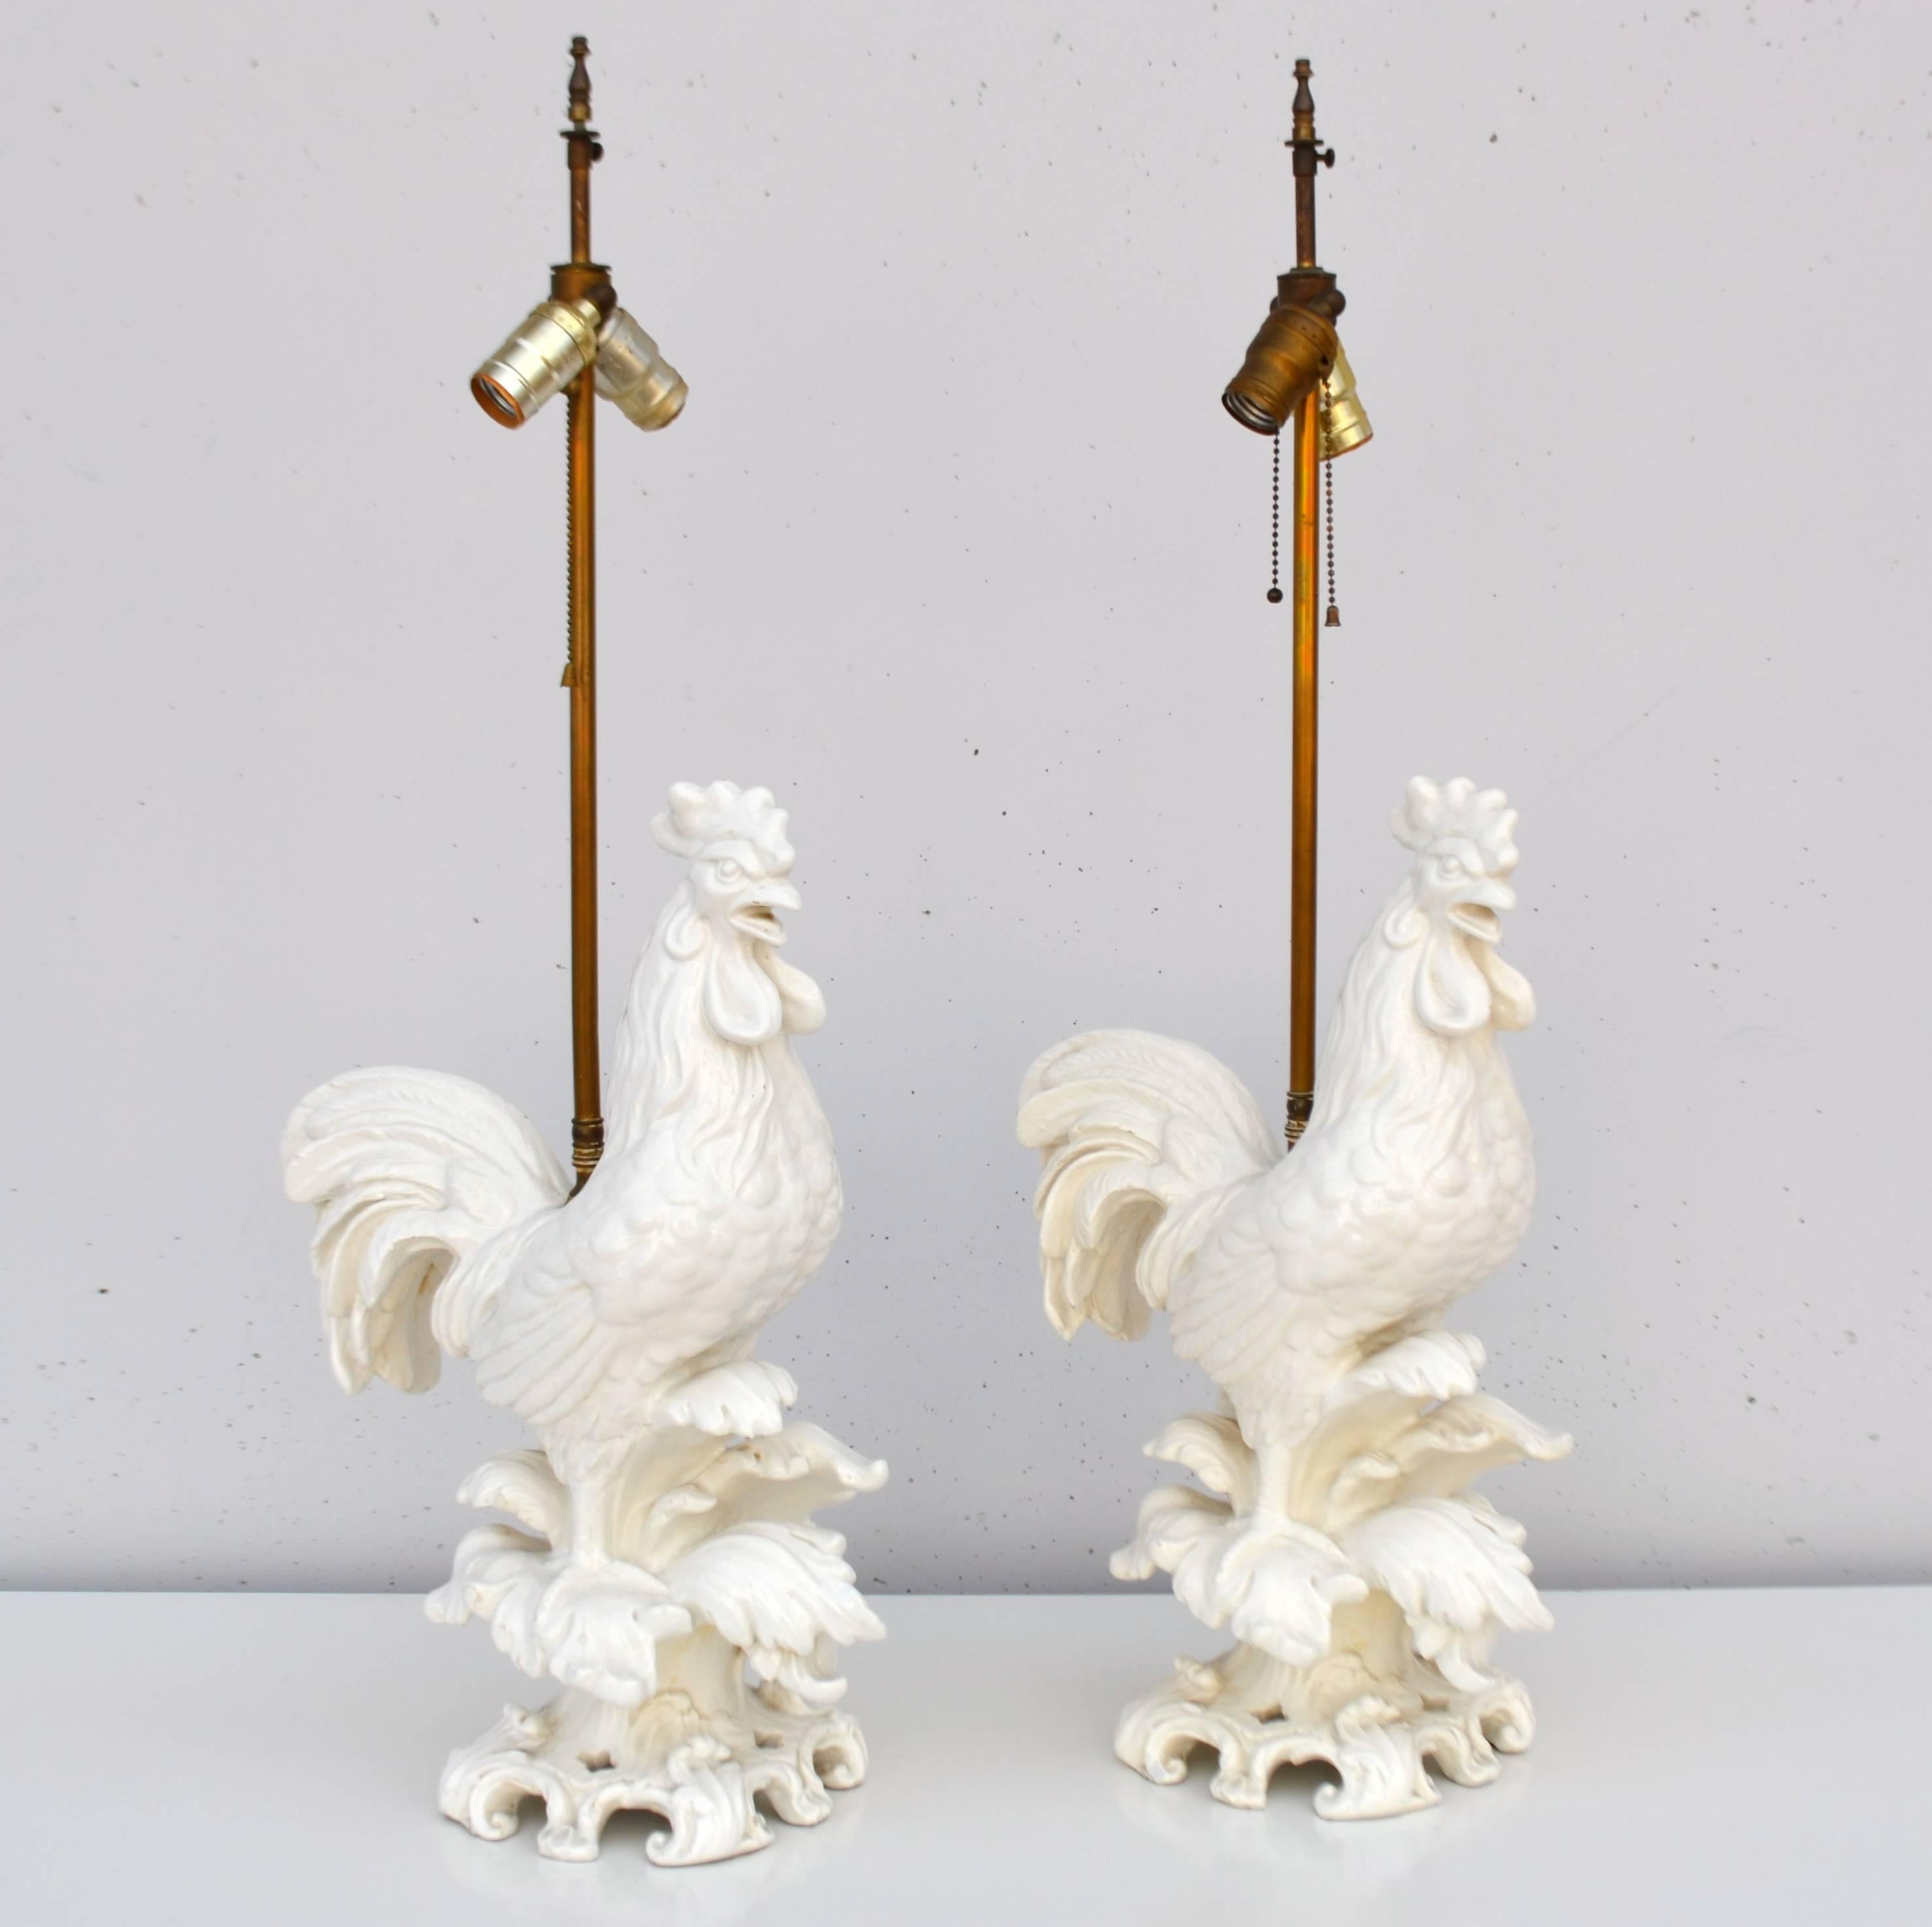 Italian Pair of Midcentury Blanc de Chine Ceramic Rooster Form Table Lamps For Sale